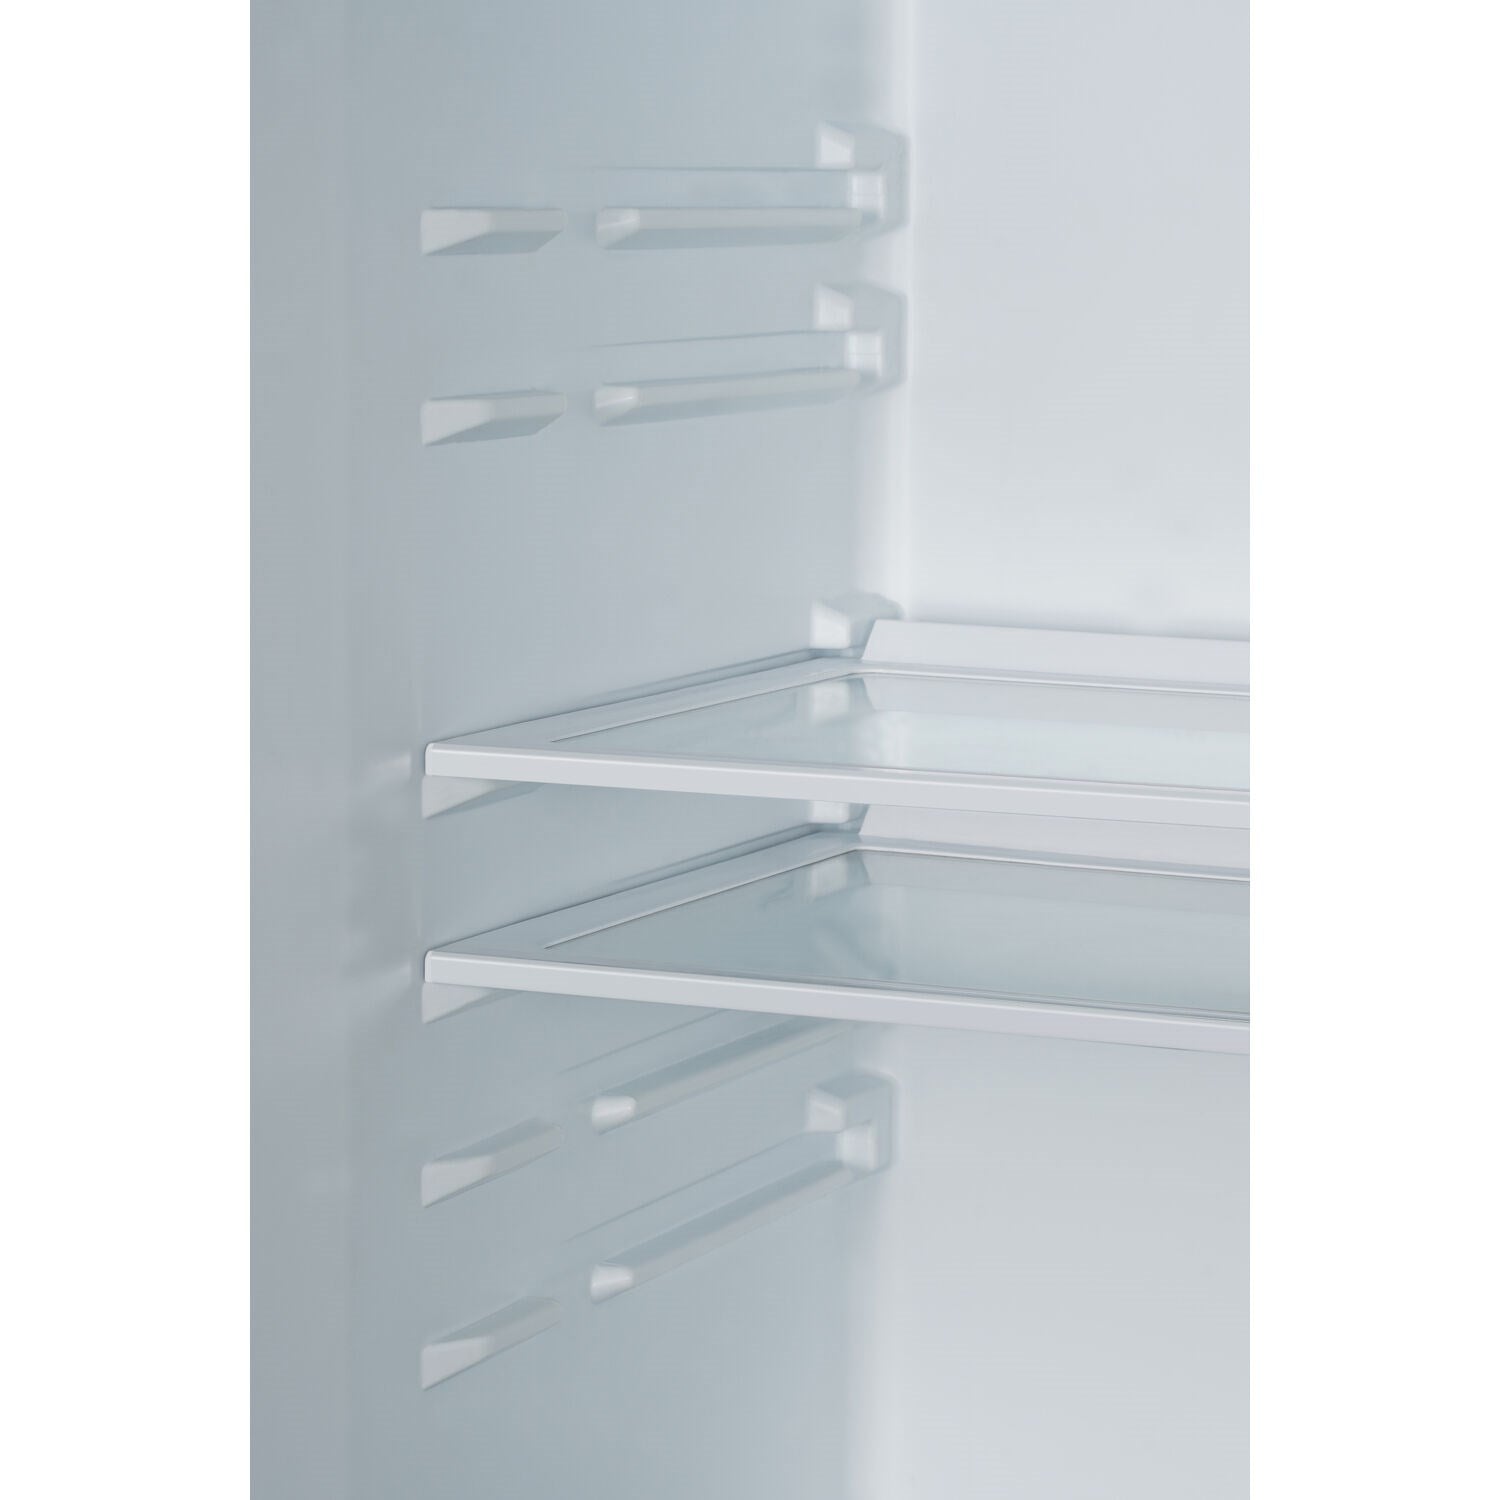 Galanz GLR18FS5S16 French-door refrigerator review - Reviewed